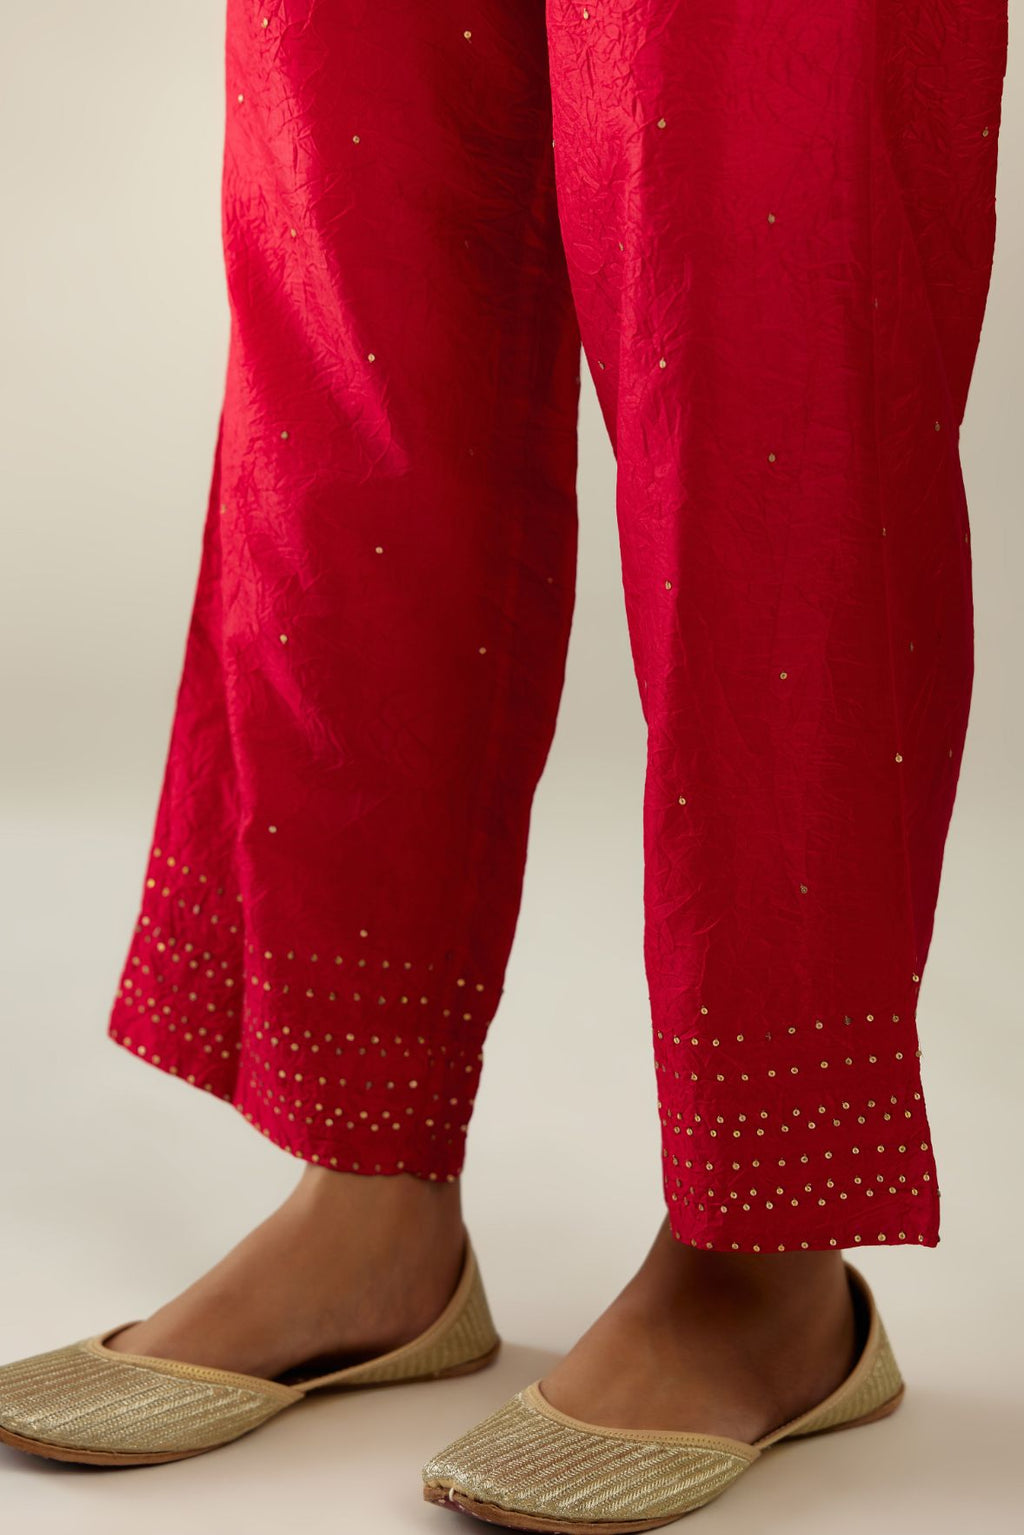 Red hand crushed pure silk straight pants with gold sequins at hem in horizontal lines formation and side pockets.